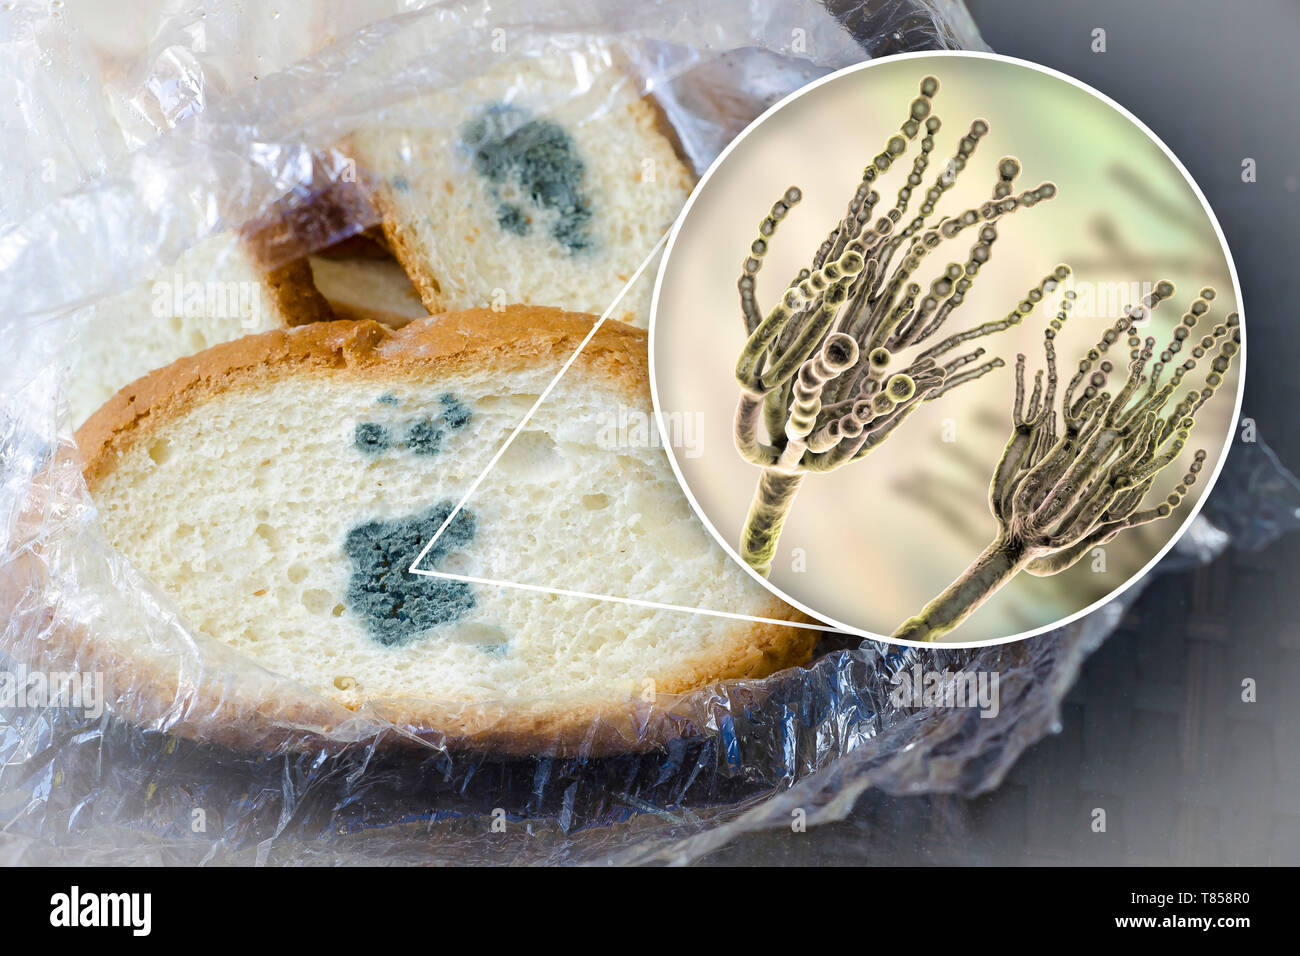 Bread with mould, composite image Stock Photo